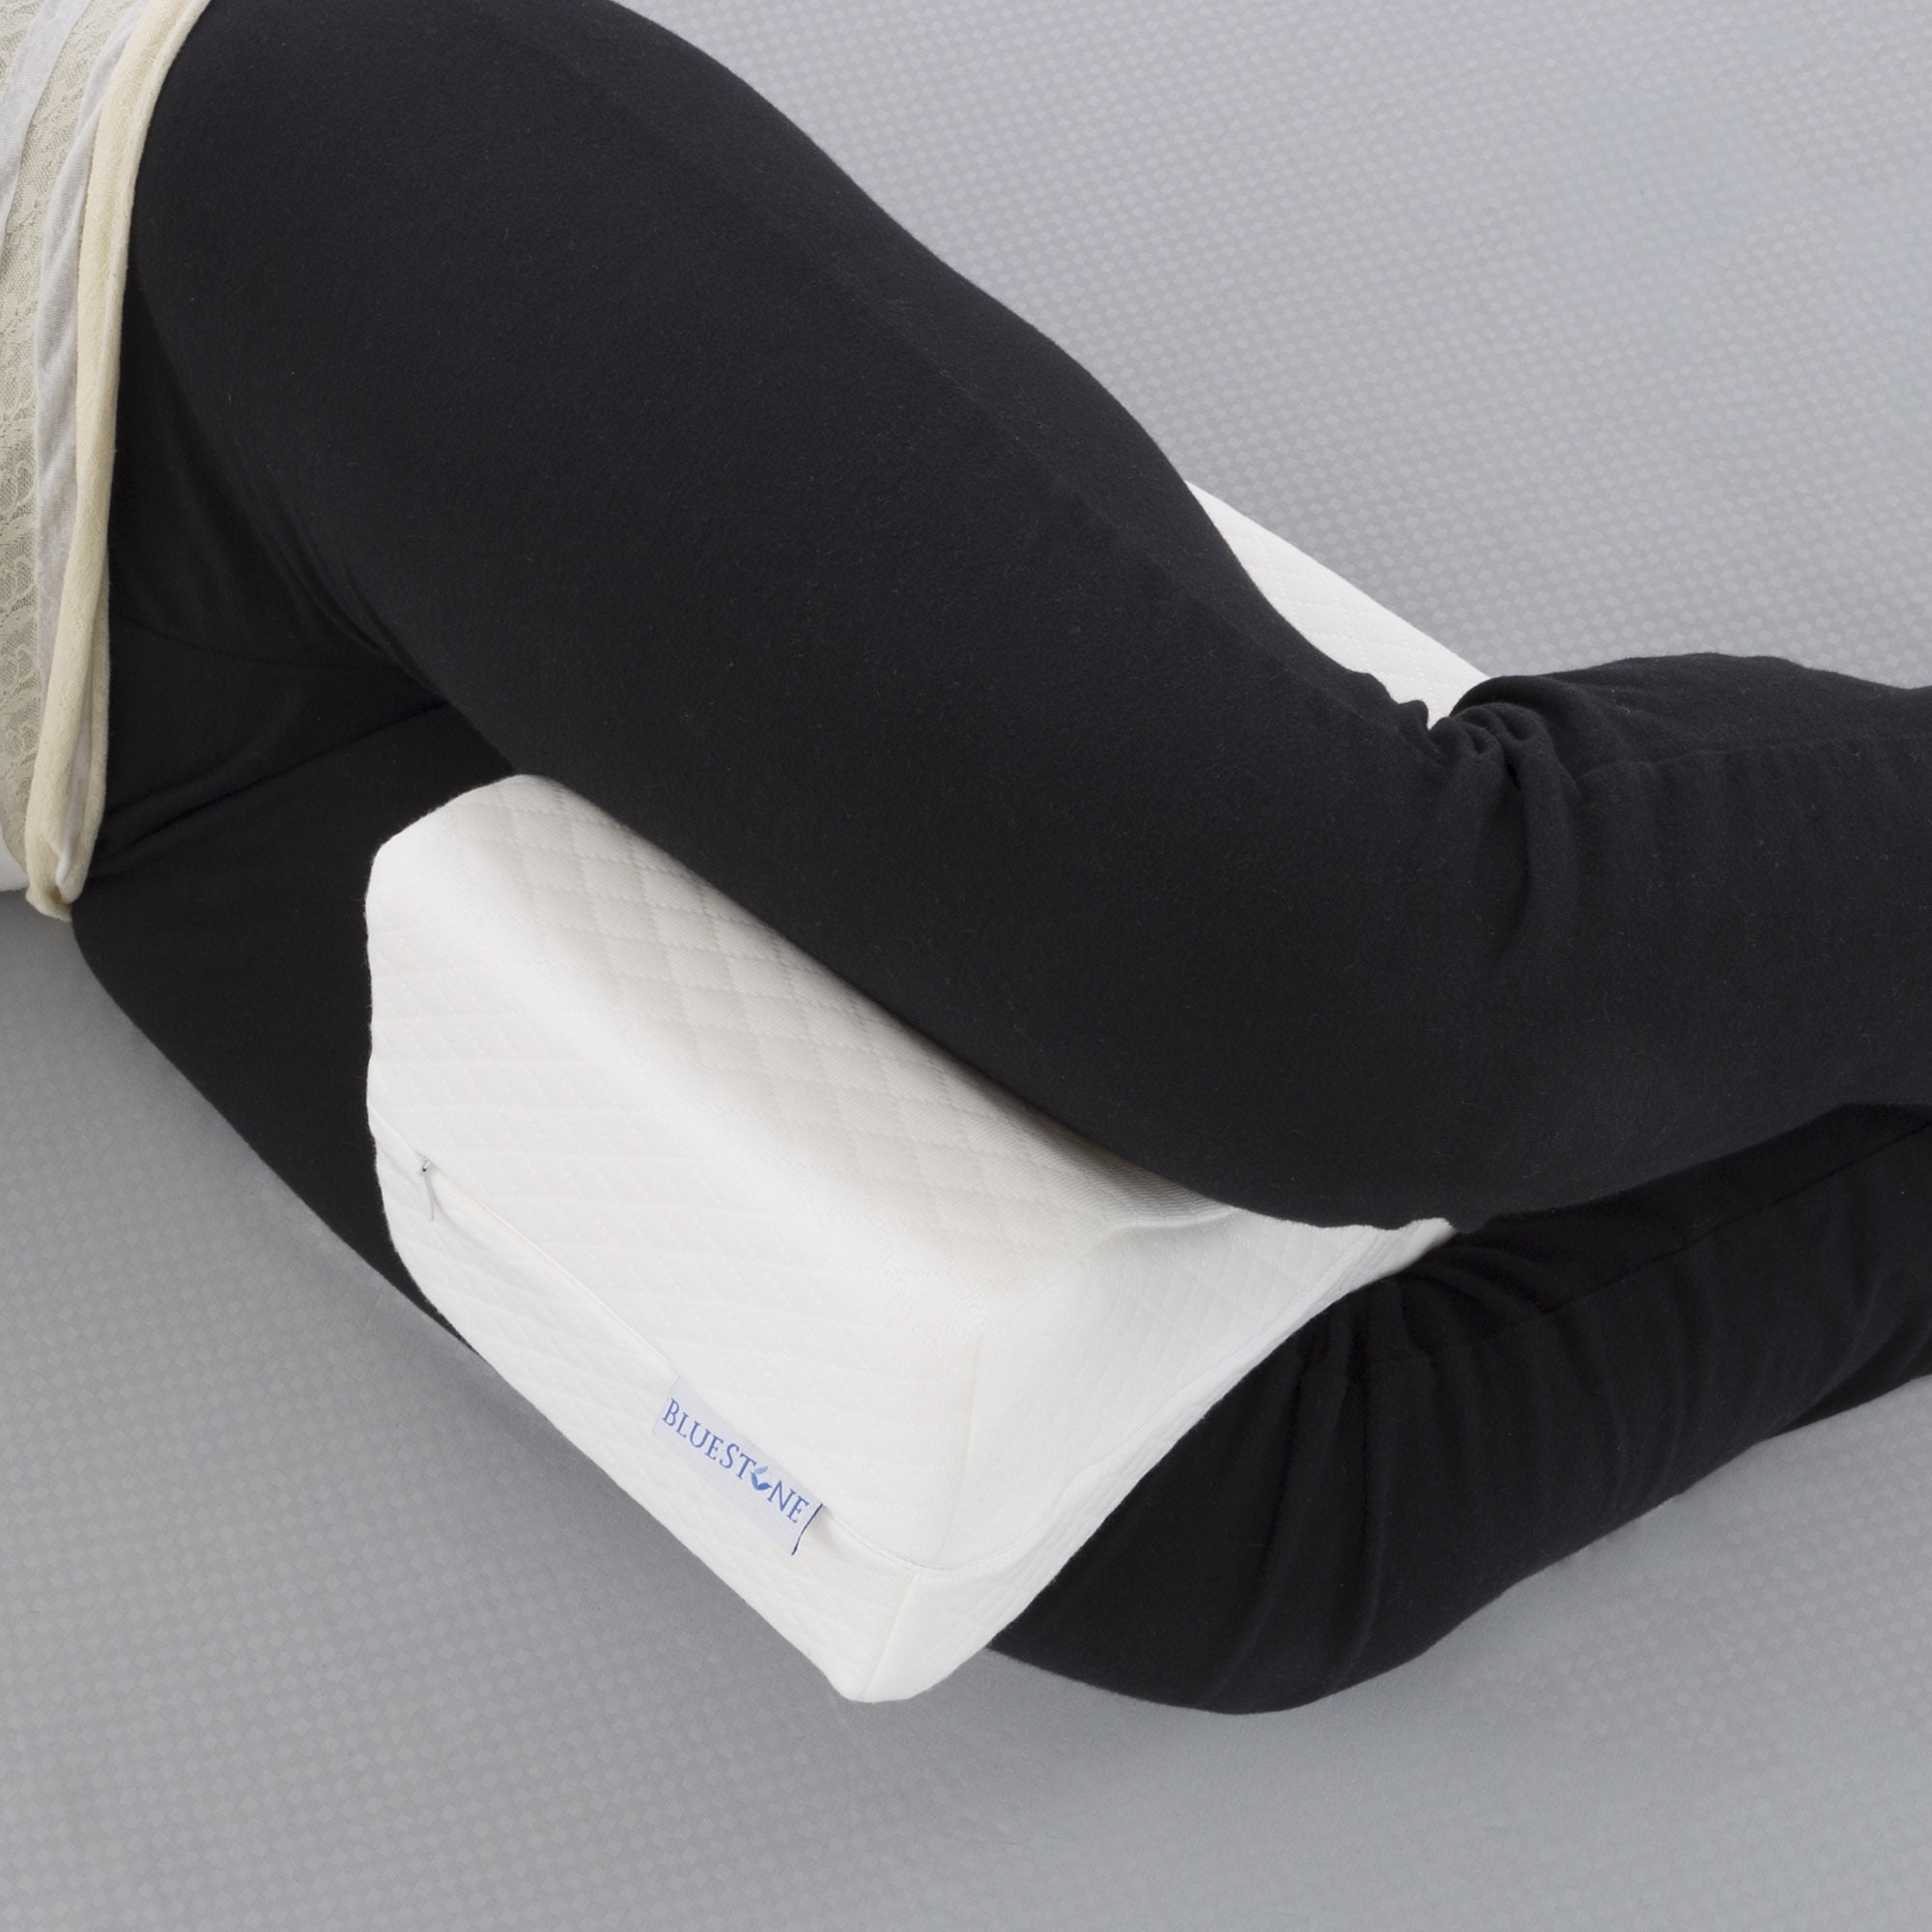 Knee Pillow for propping up your knees